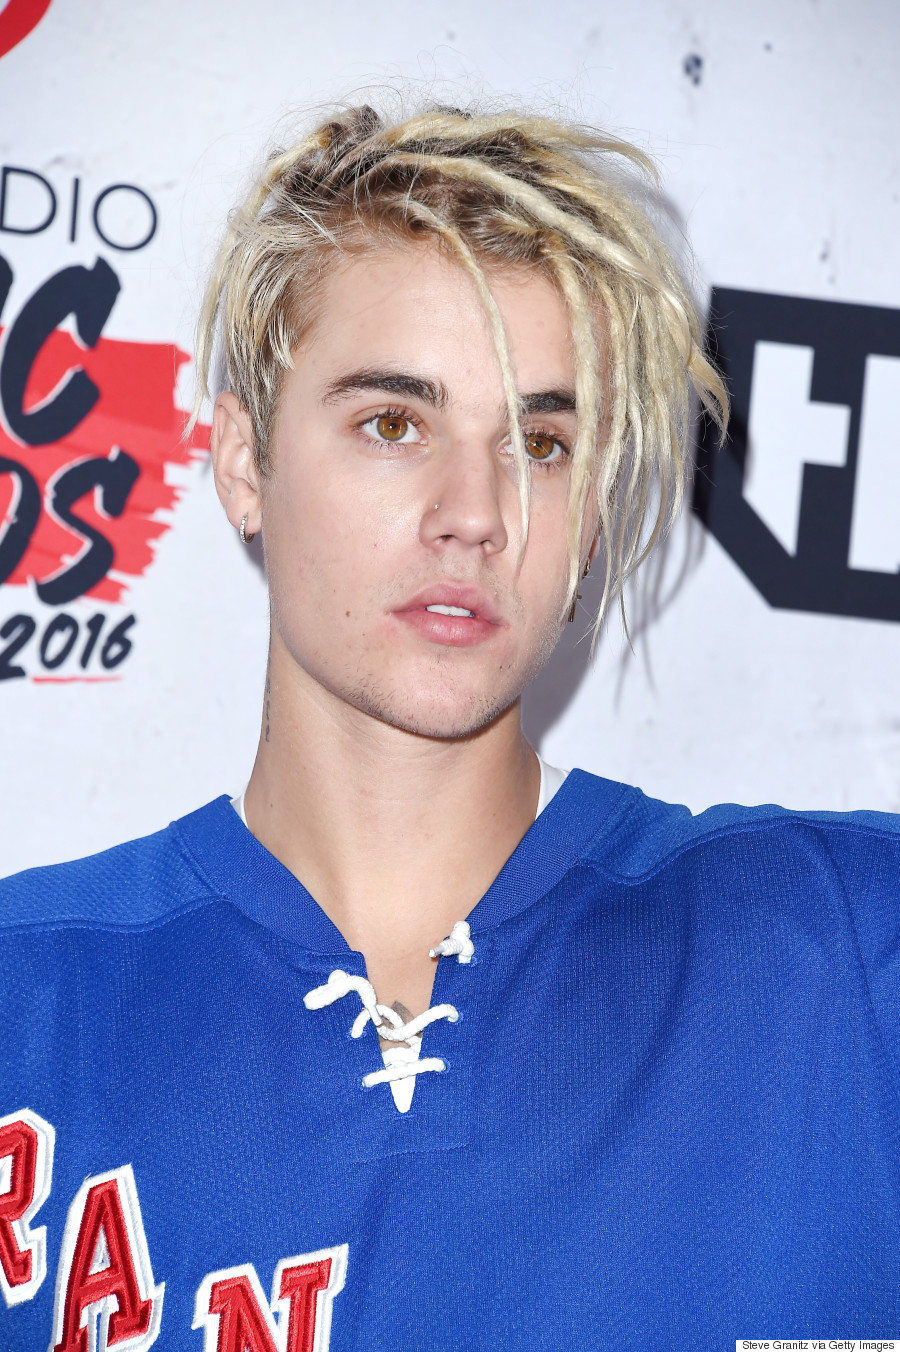 Justin Bieber Gets Dreadlocks And People Are NOT Happy